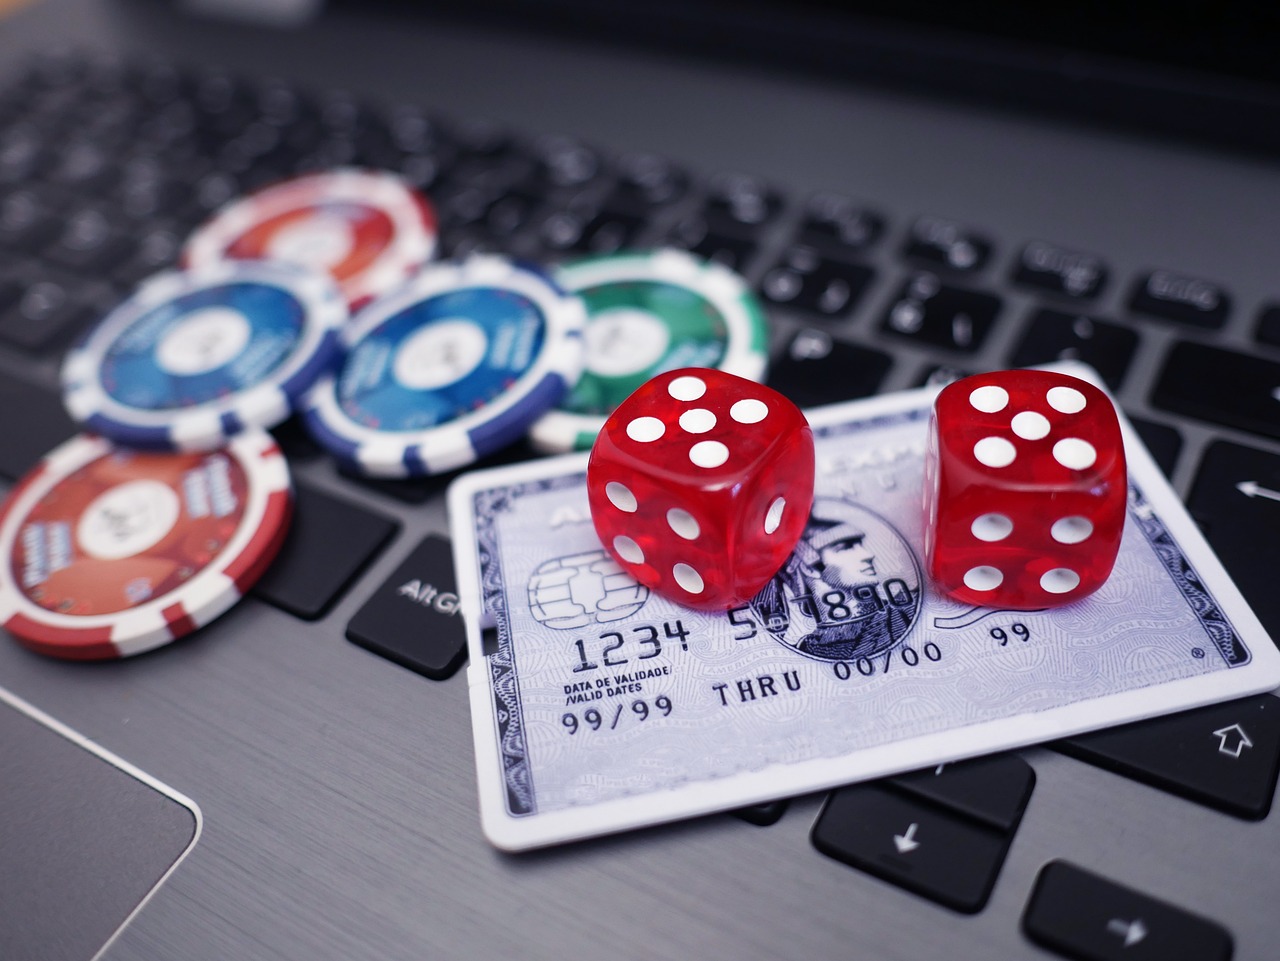 2. Ensuring a Safe and Secure Online Gambling Experience